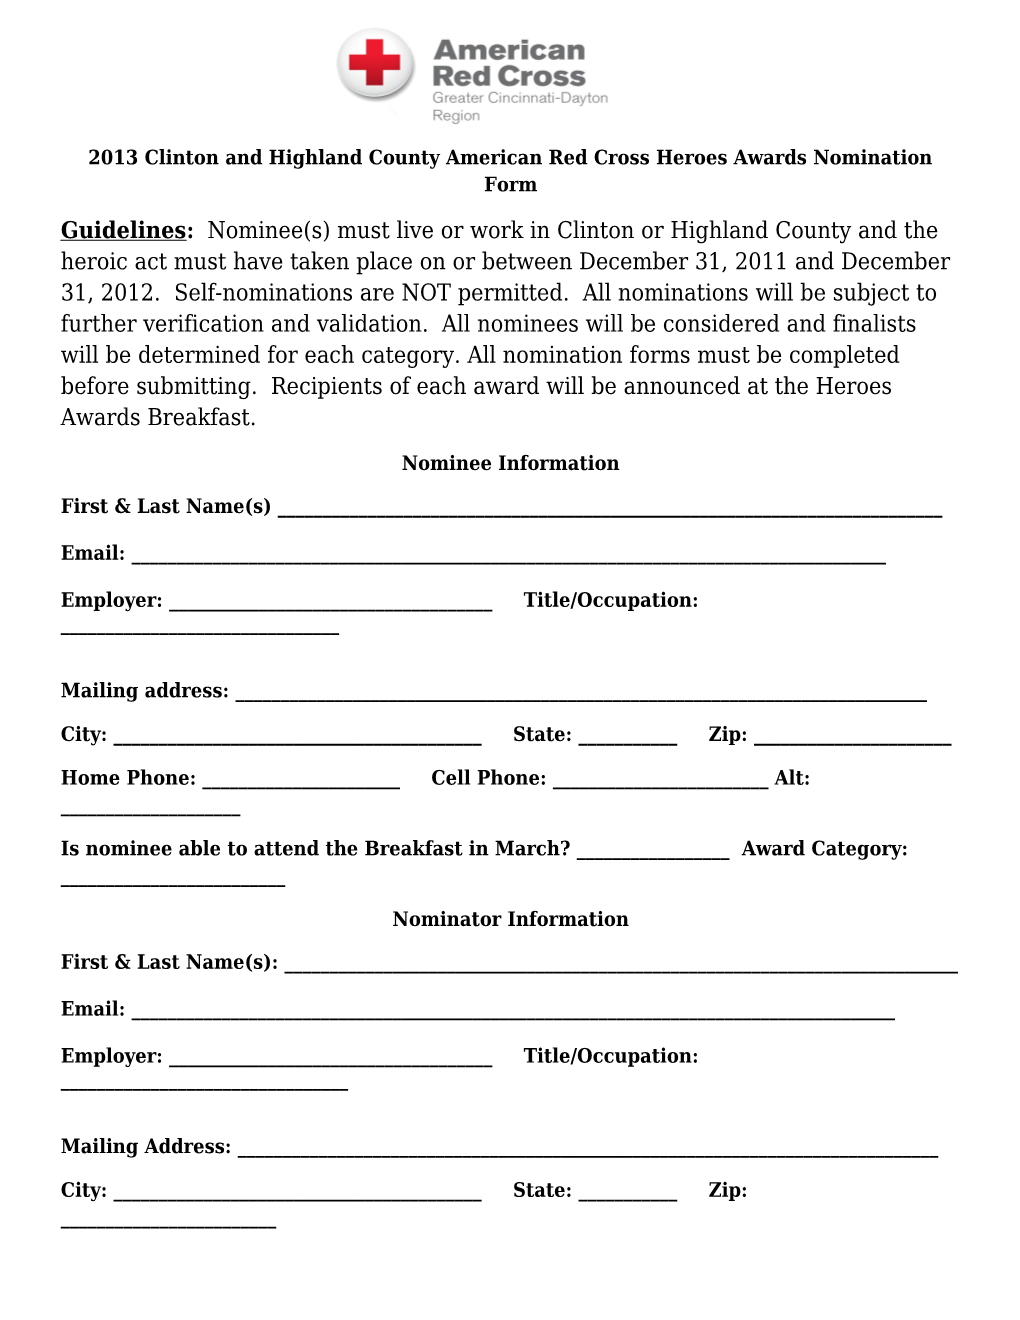 2013 Clinton and Highland County American Red Cross Heroes Awards Nomination Form